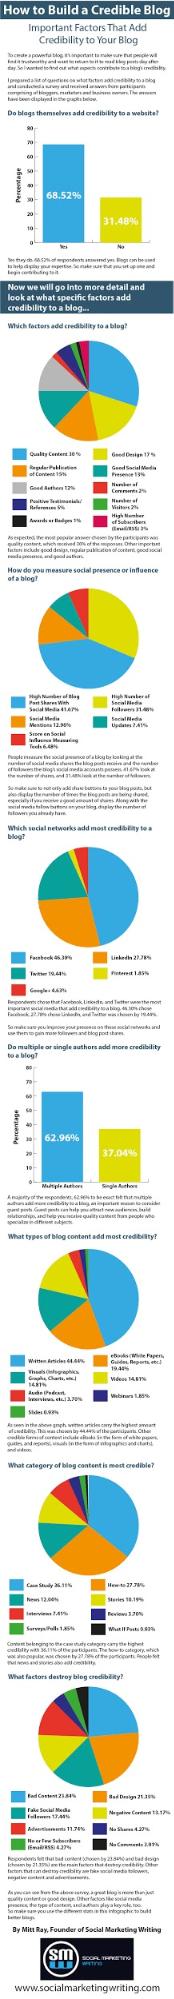 Infographic of how to build a credible blog.